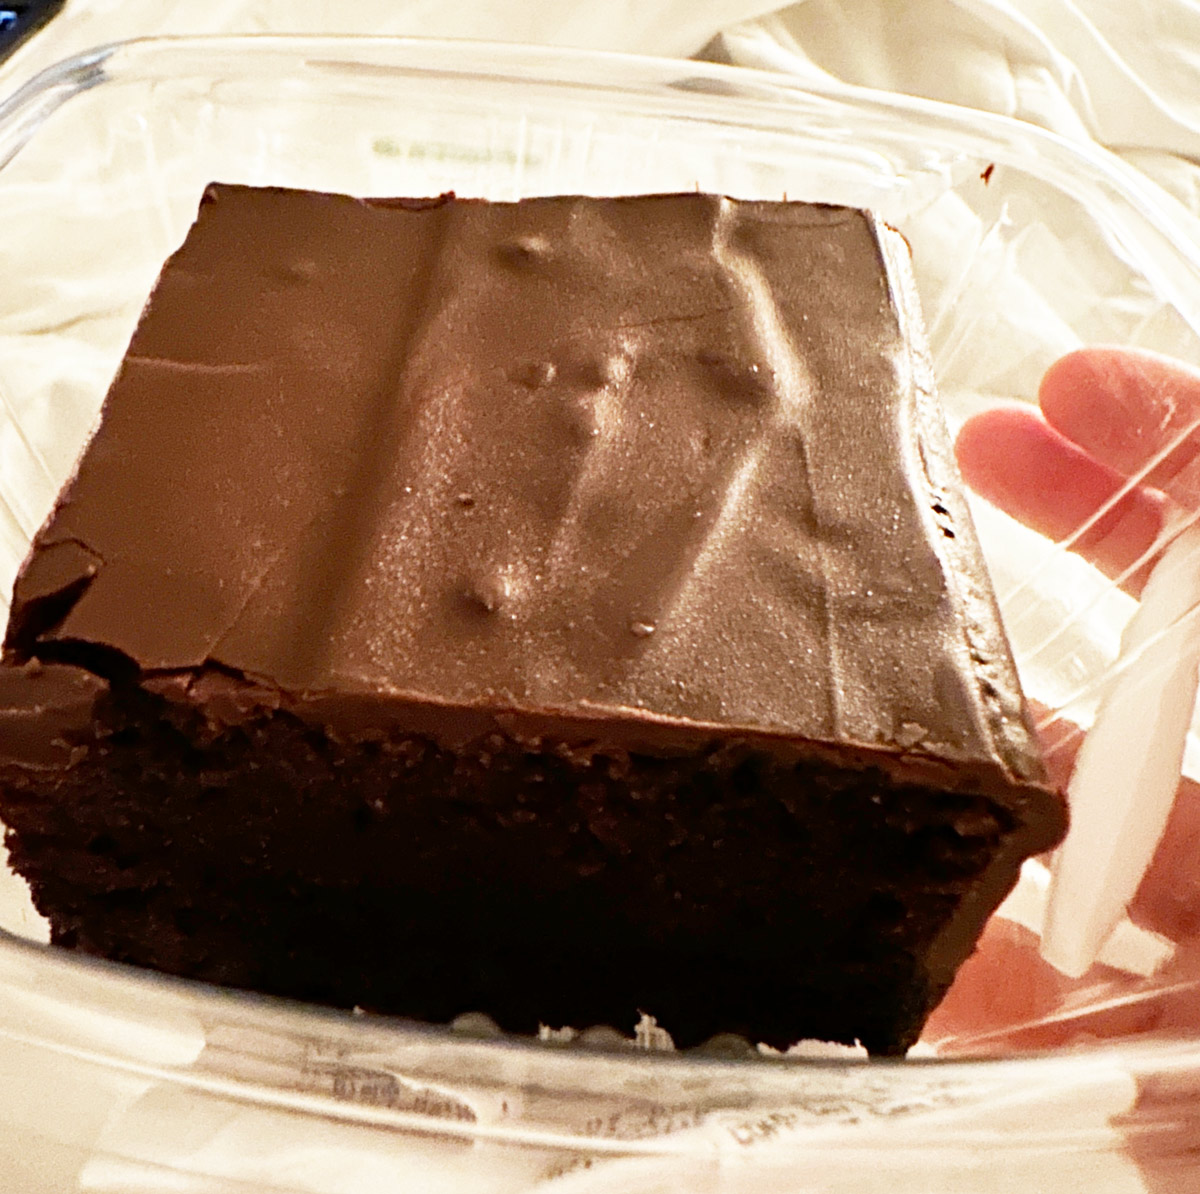 piece of chocolate cake in a takeout container